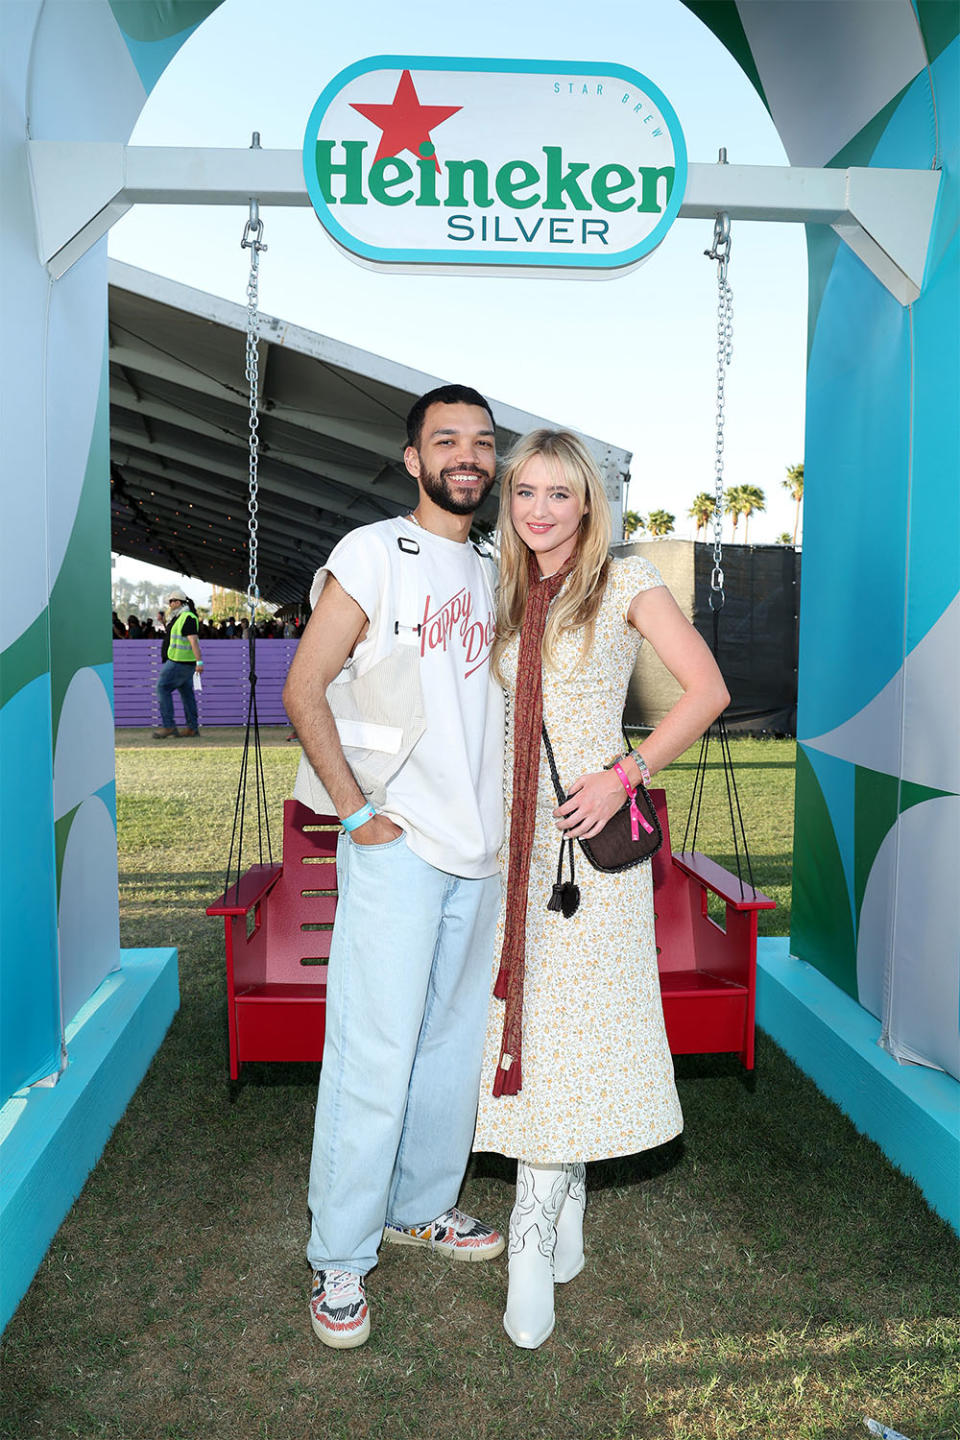 Justice Smith and Kathryn Newton stop by the Heineken House at the 2023 Coachella Valley Music and Arts Festival on April 14, 2023 in Indio, California.